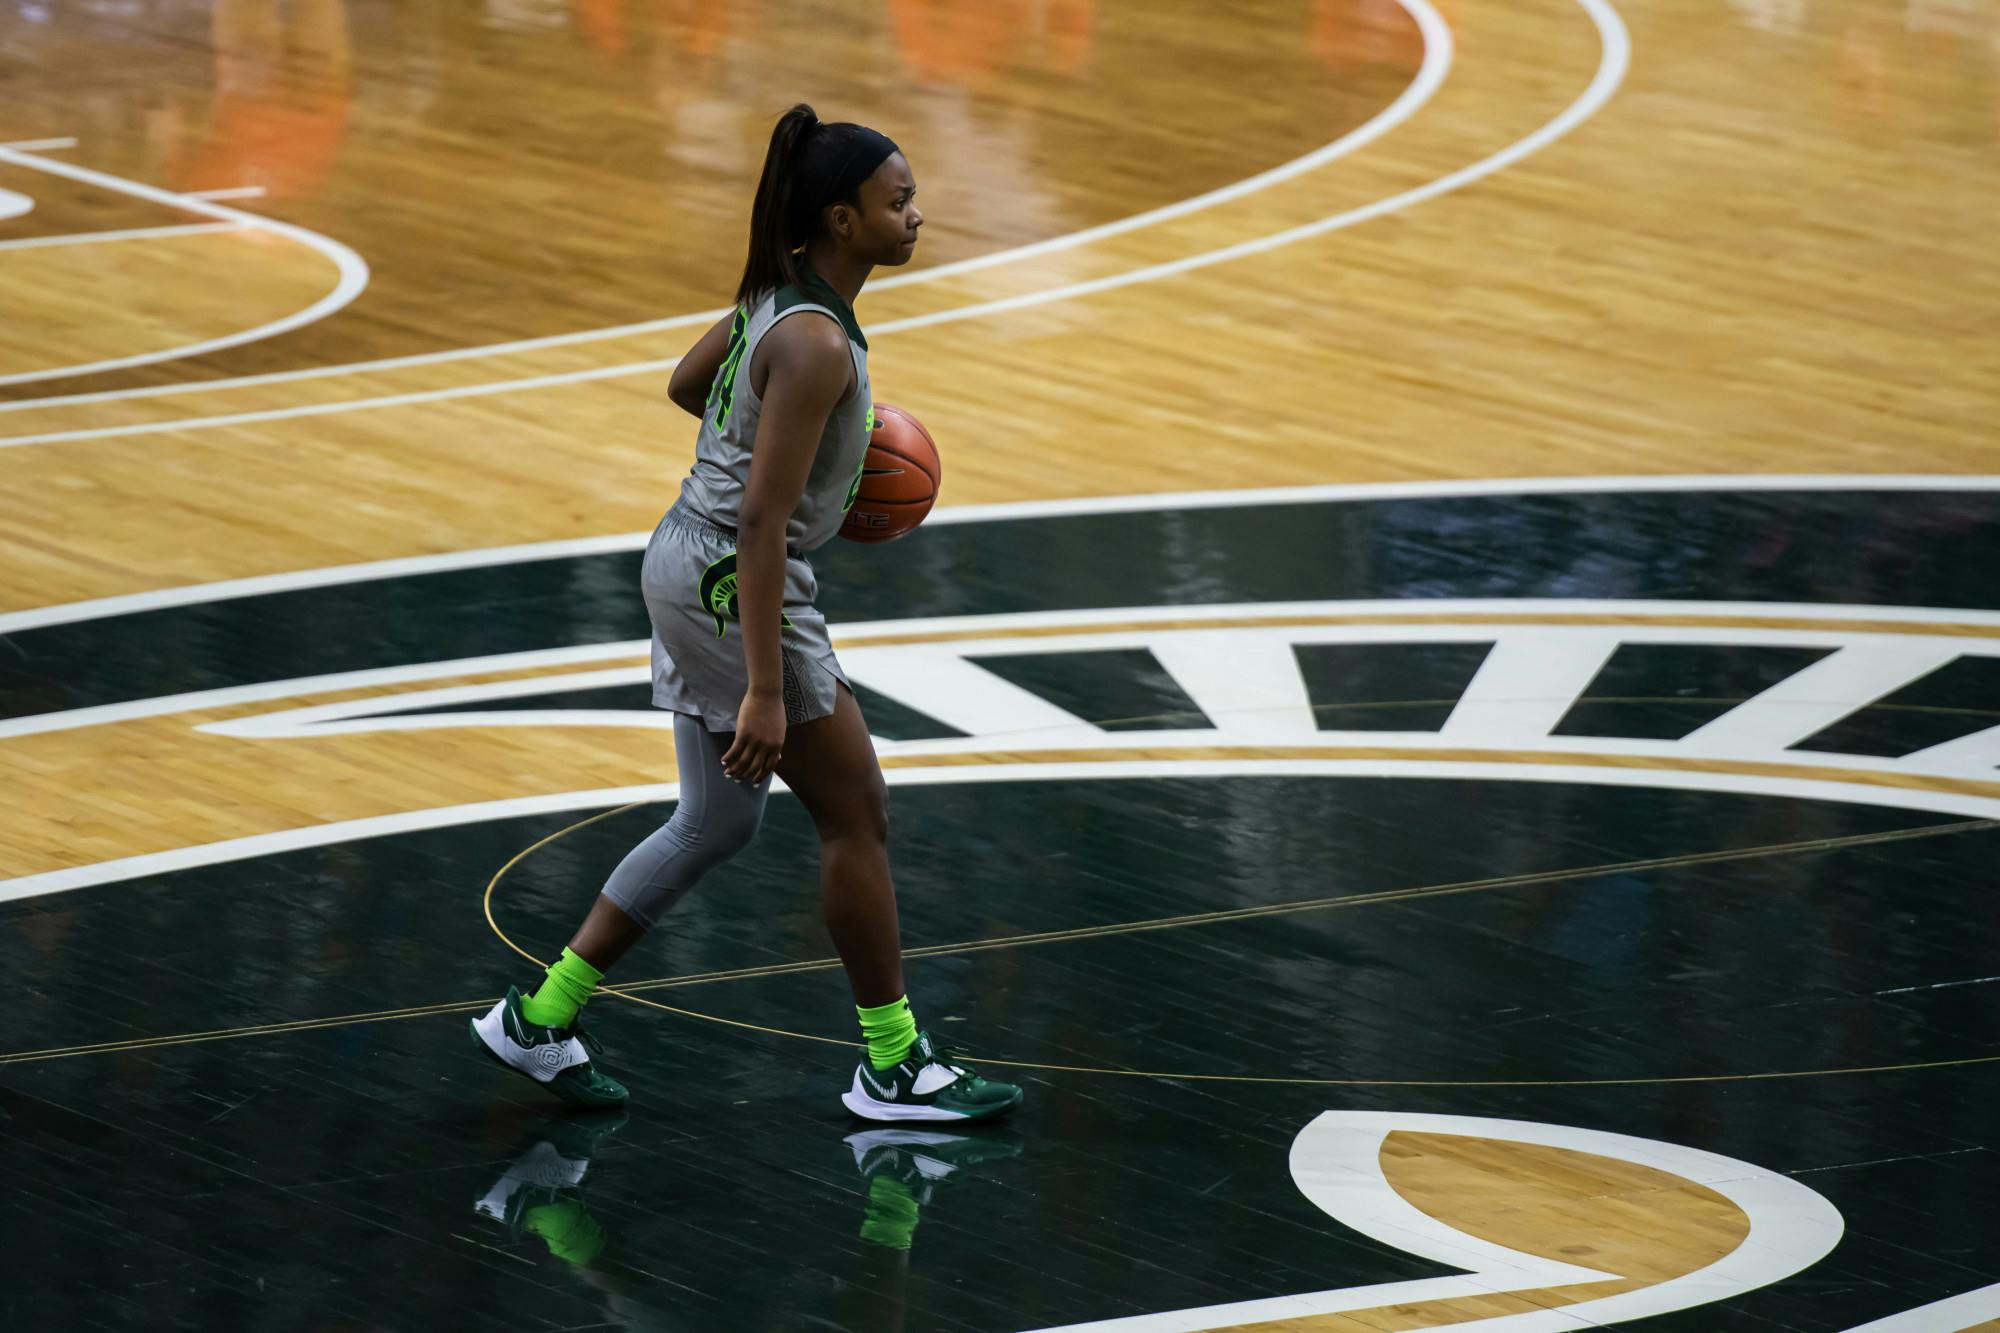 <p>Junior guard Nia Clouden takes the ball up court during a matchup with Maryland on Jan. 7, 2021.</p>